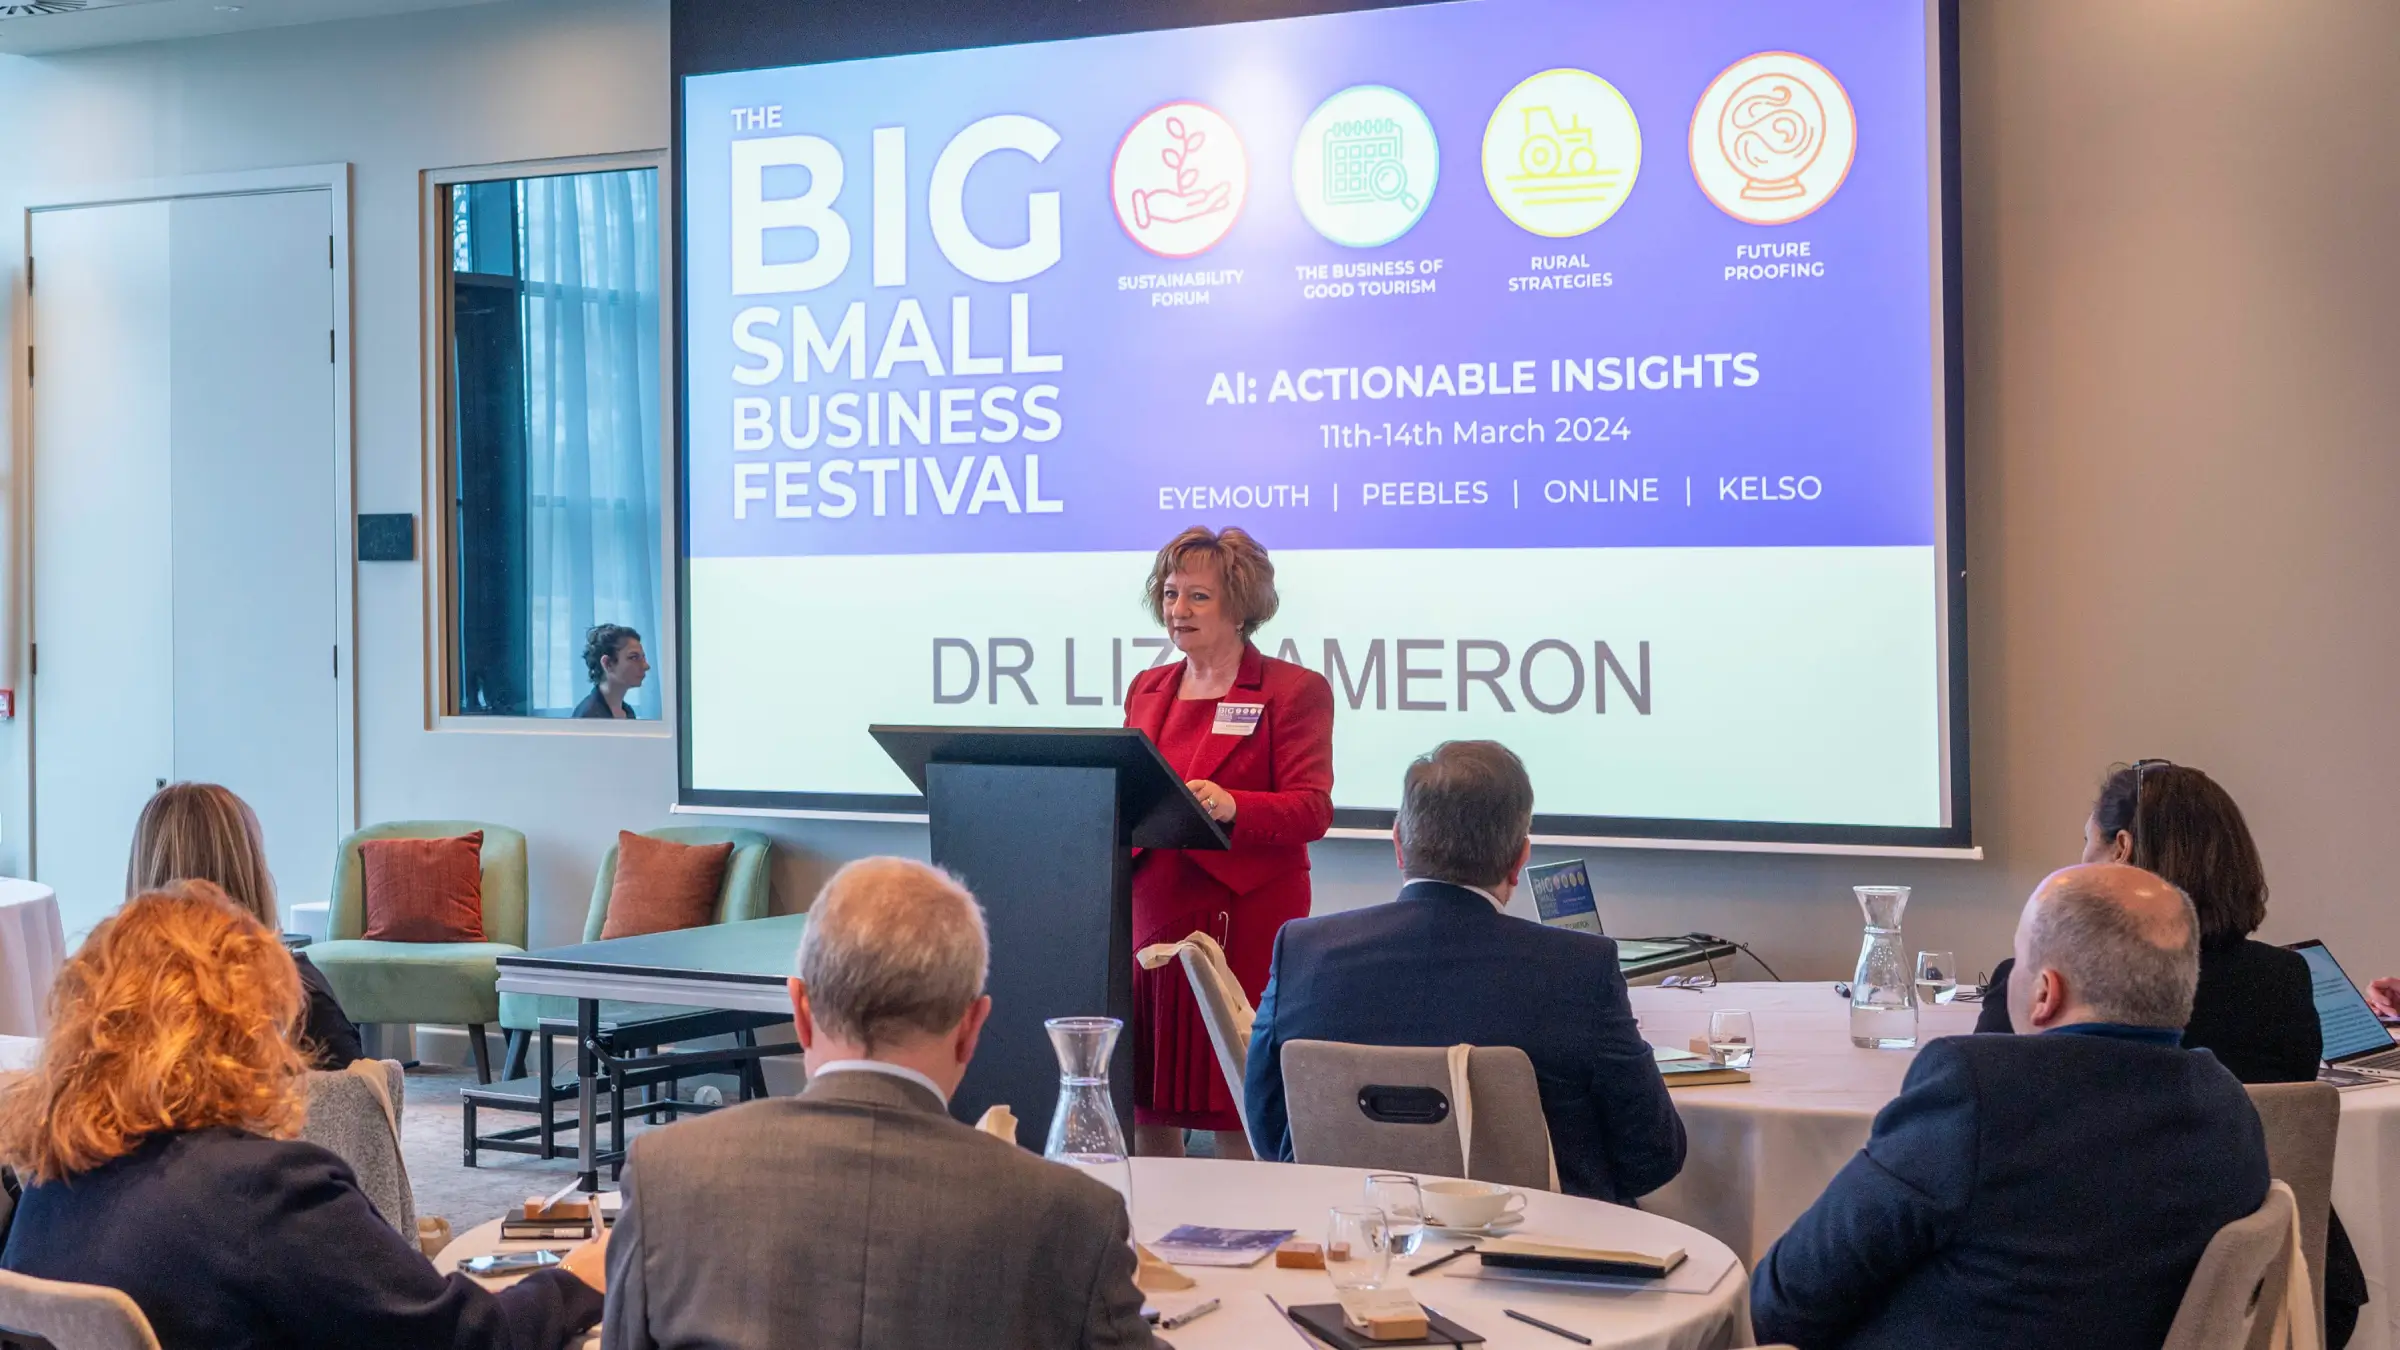 Dr Liz Cameron speaking at the big small business festival